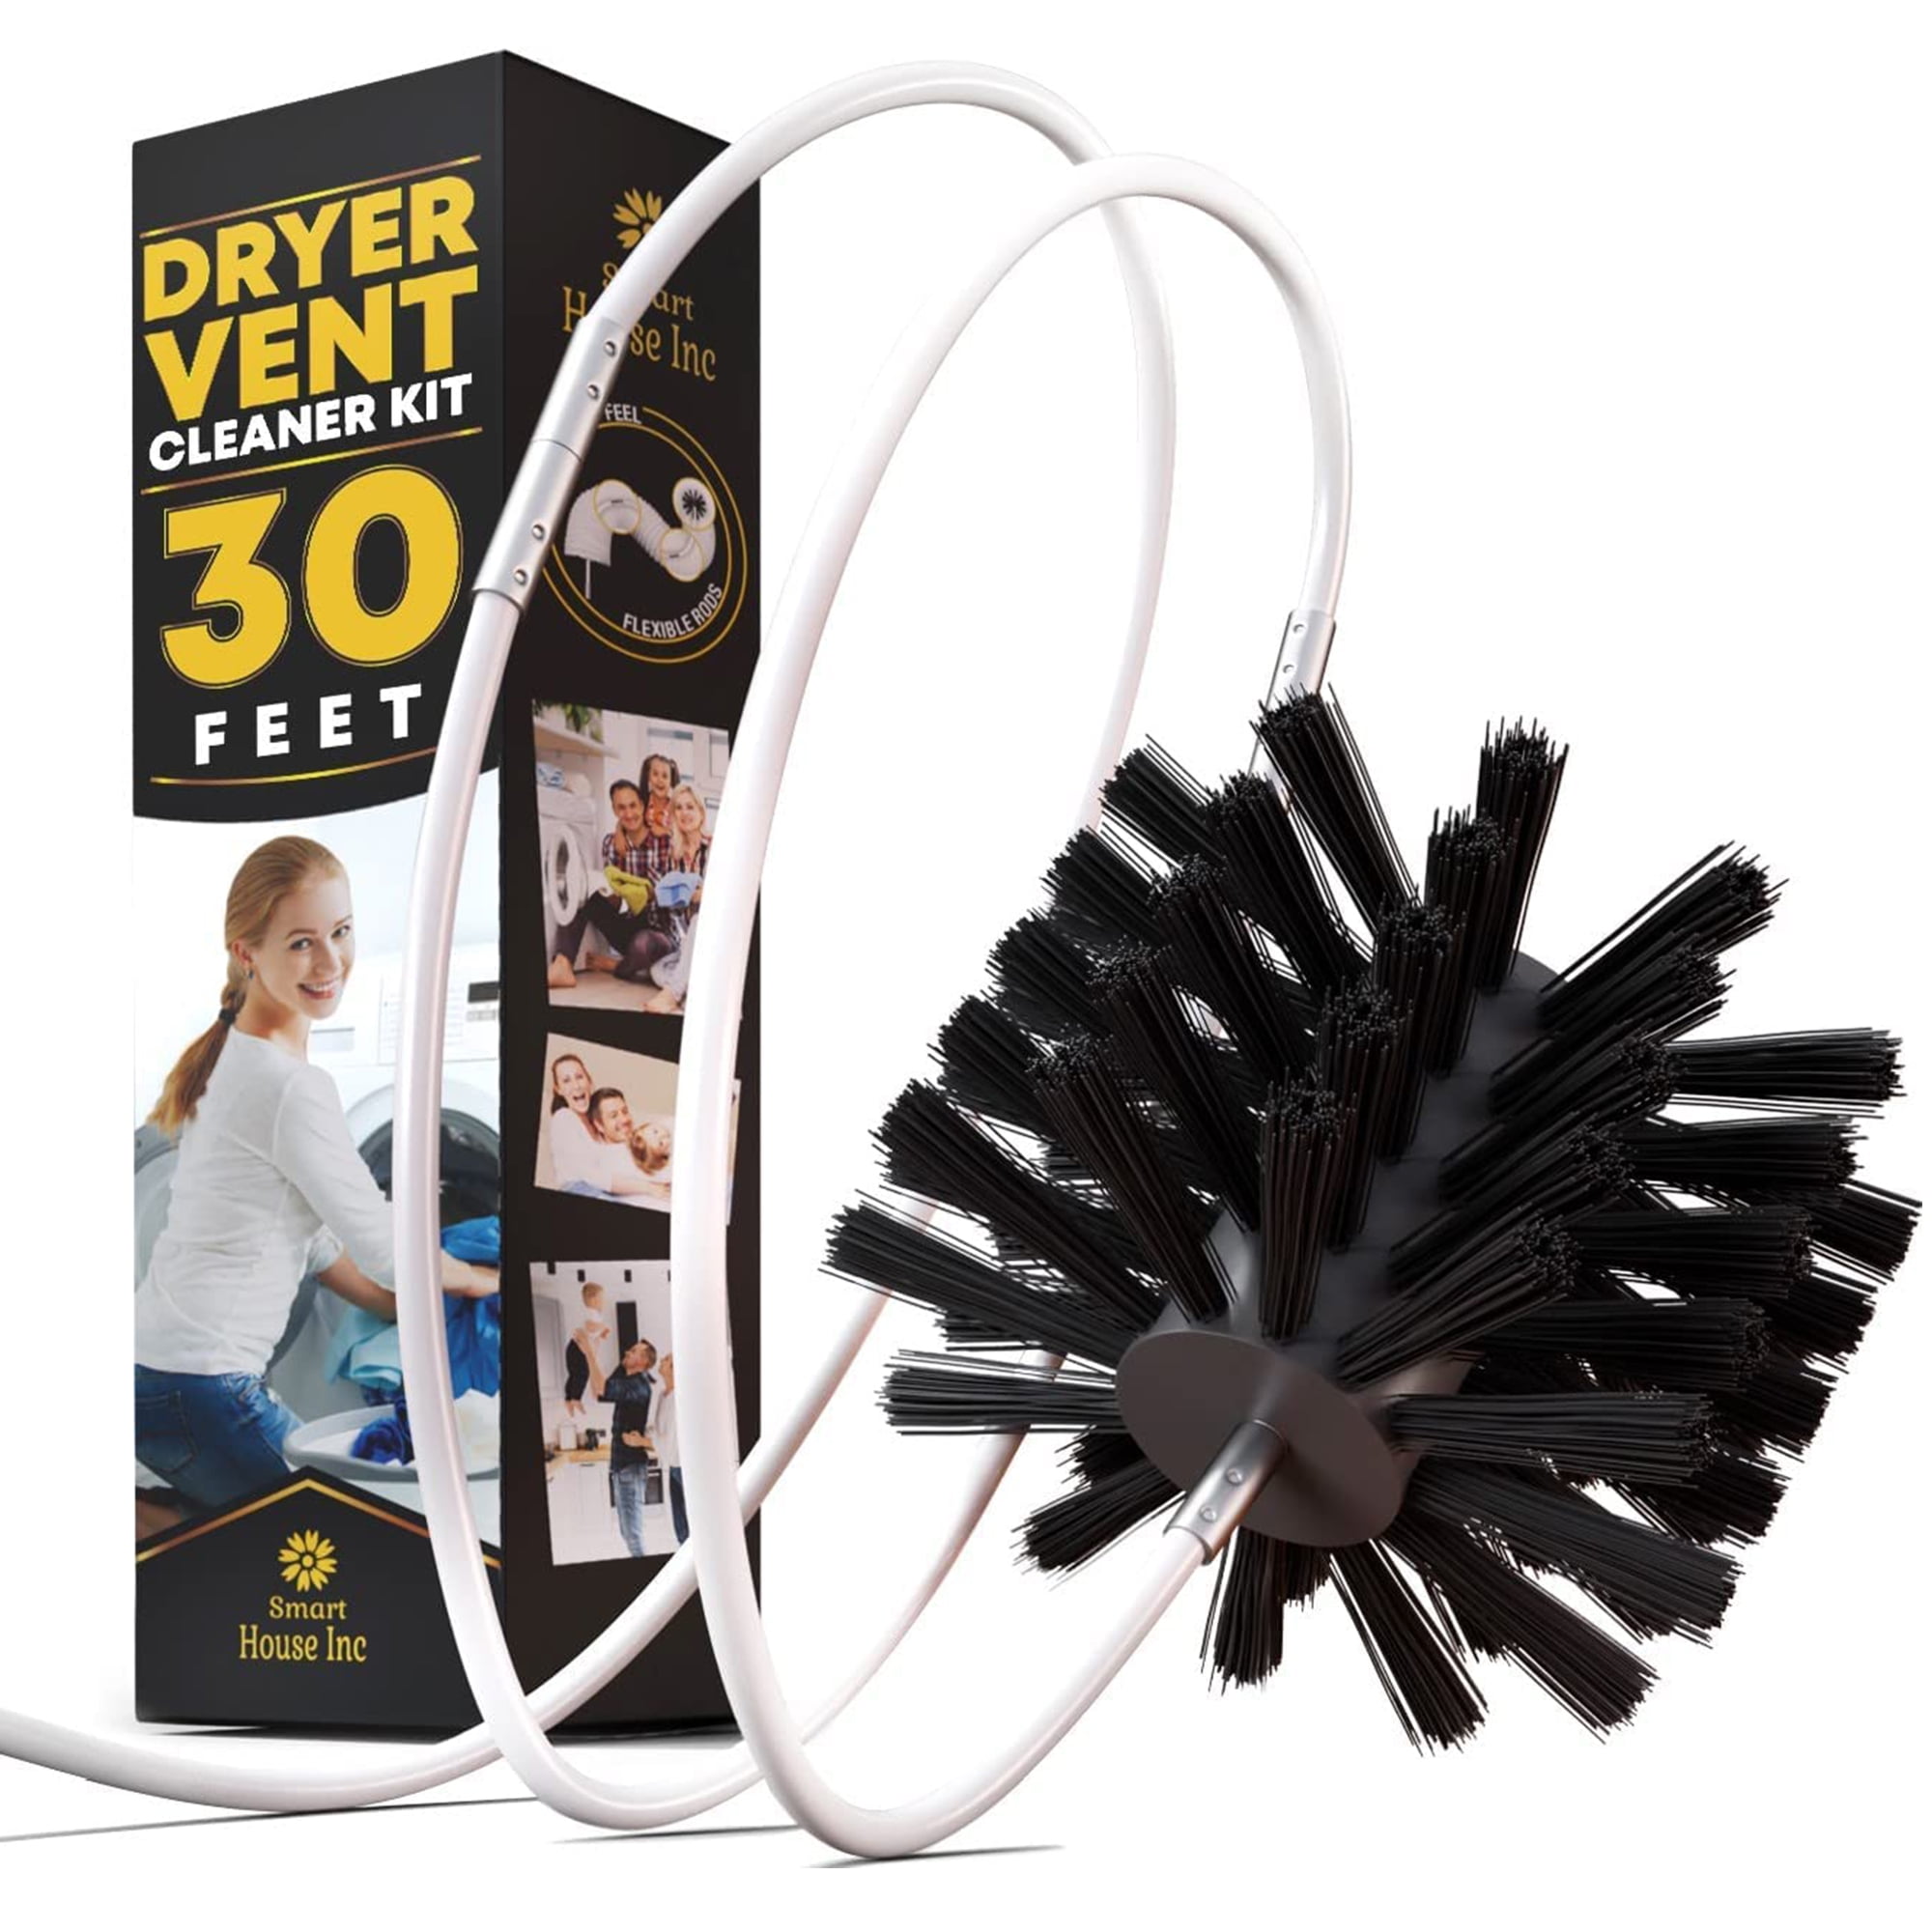 These $10 Lint Brushes Can Quickly Clean Your Dryer Vent